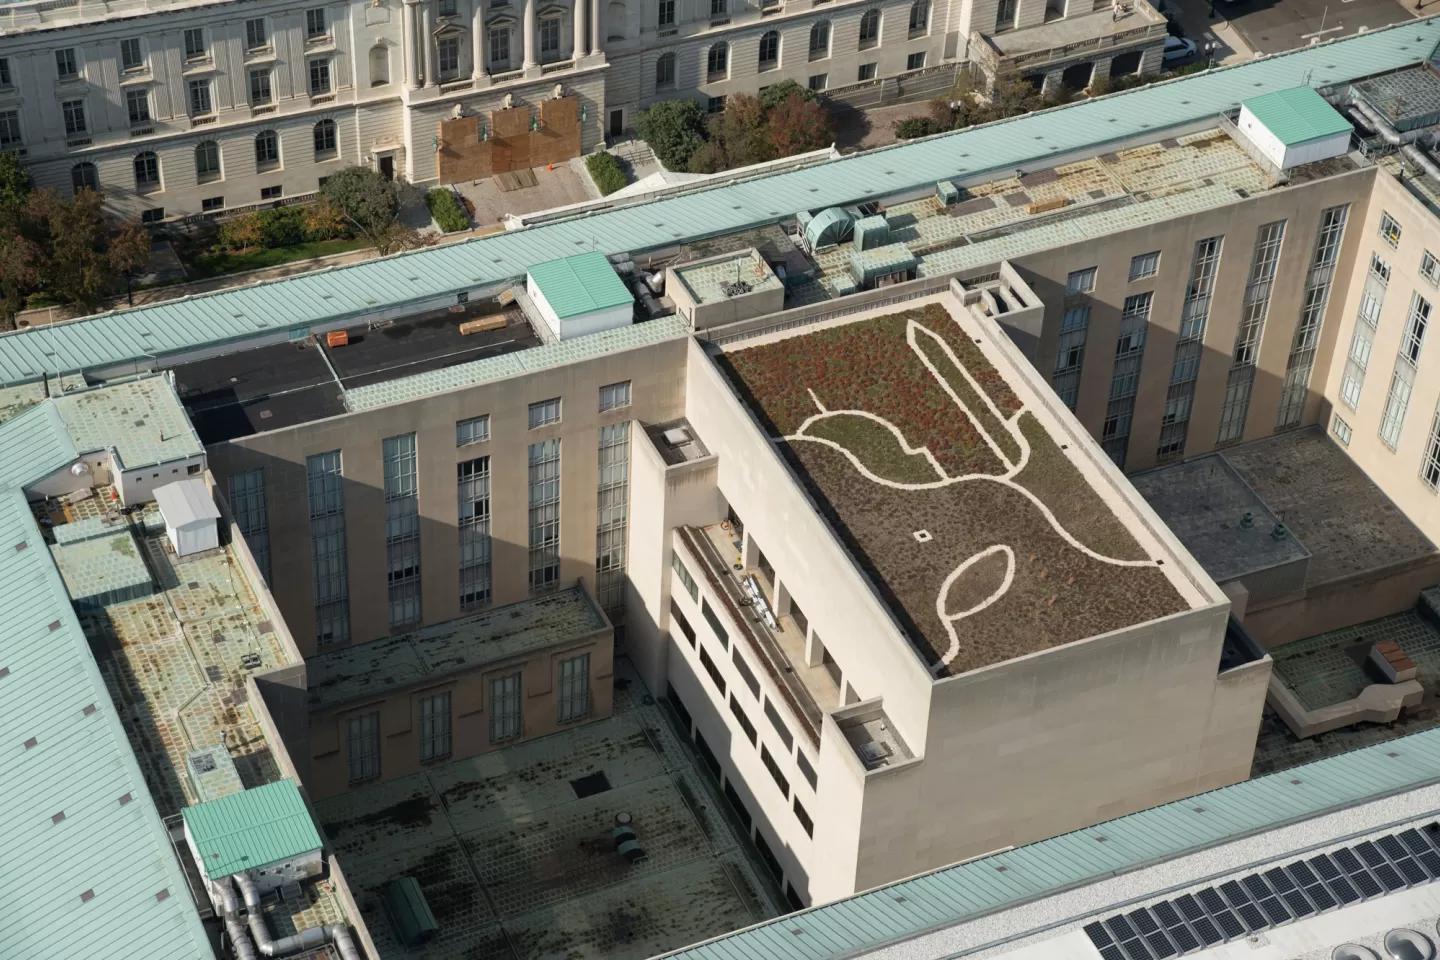 Aerial view of the green roof at the Dirksen Senate Office Building.